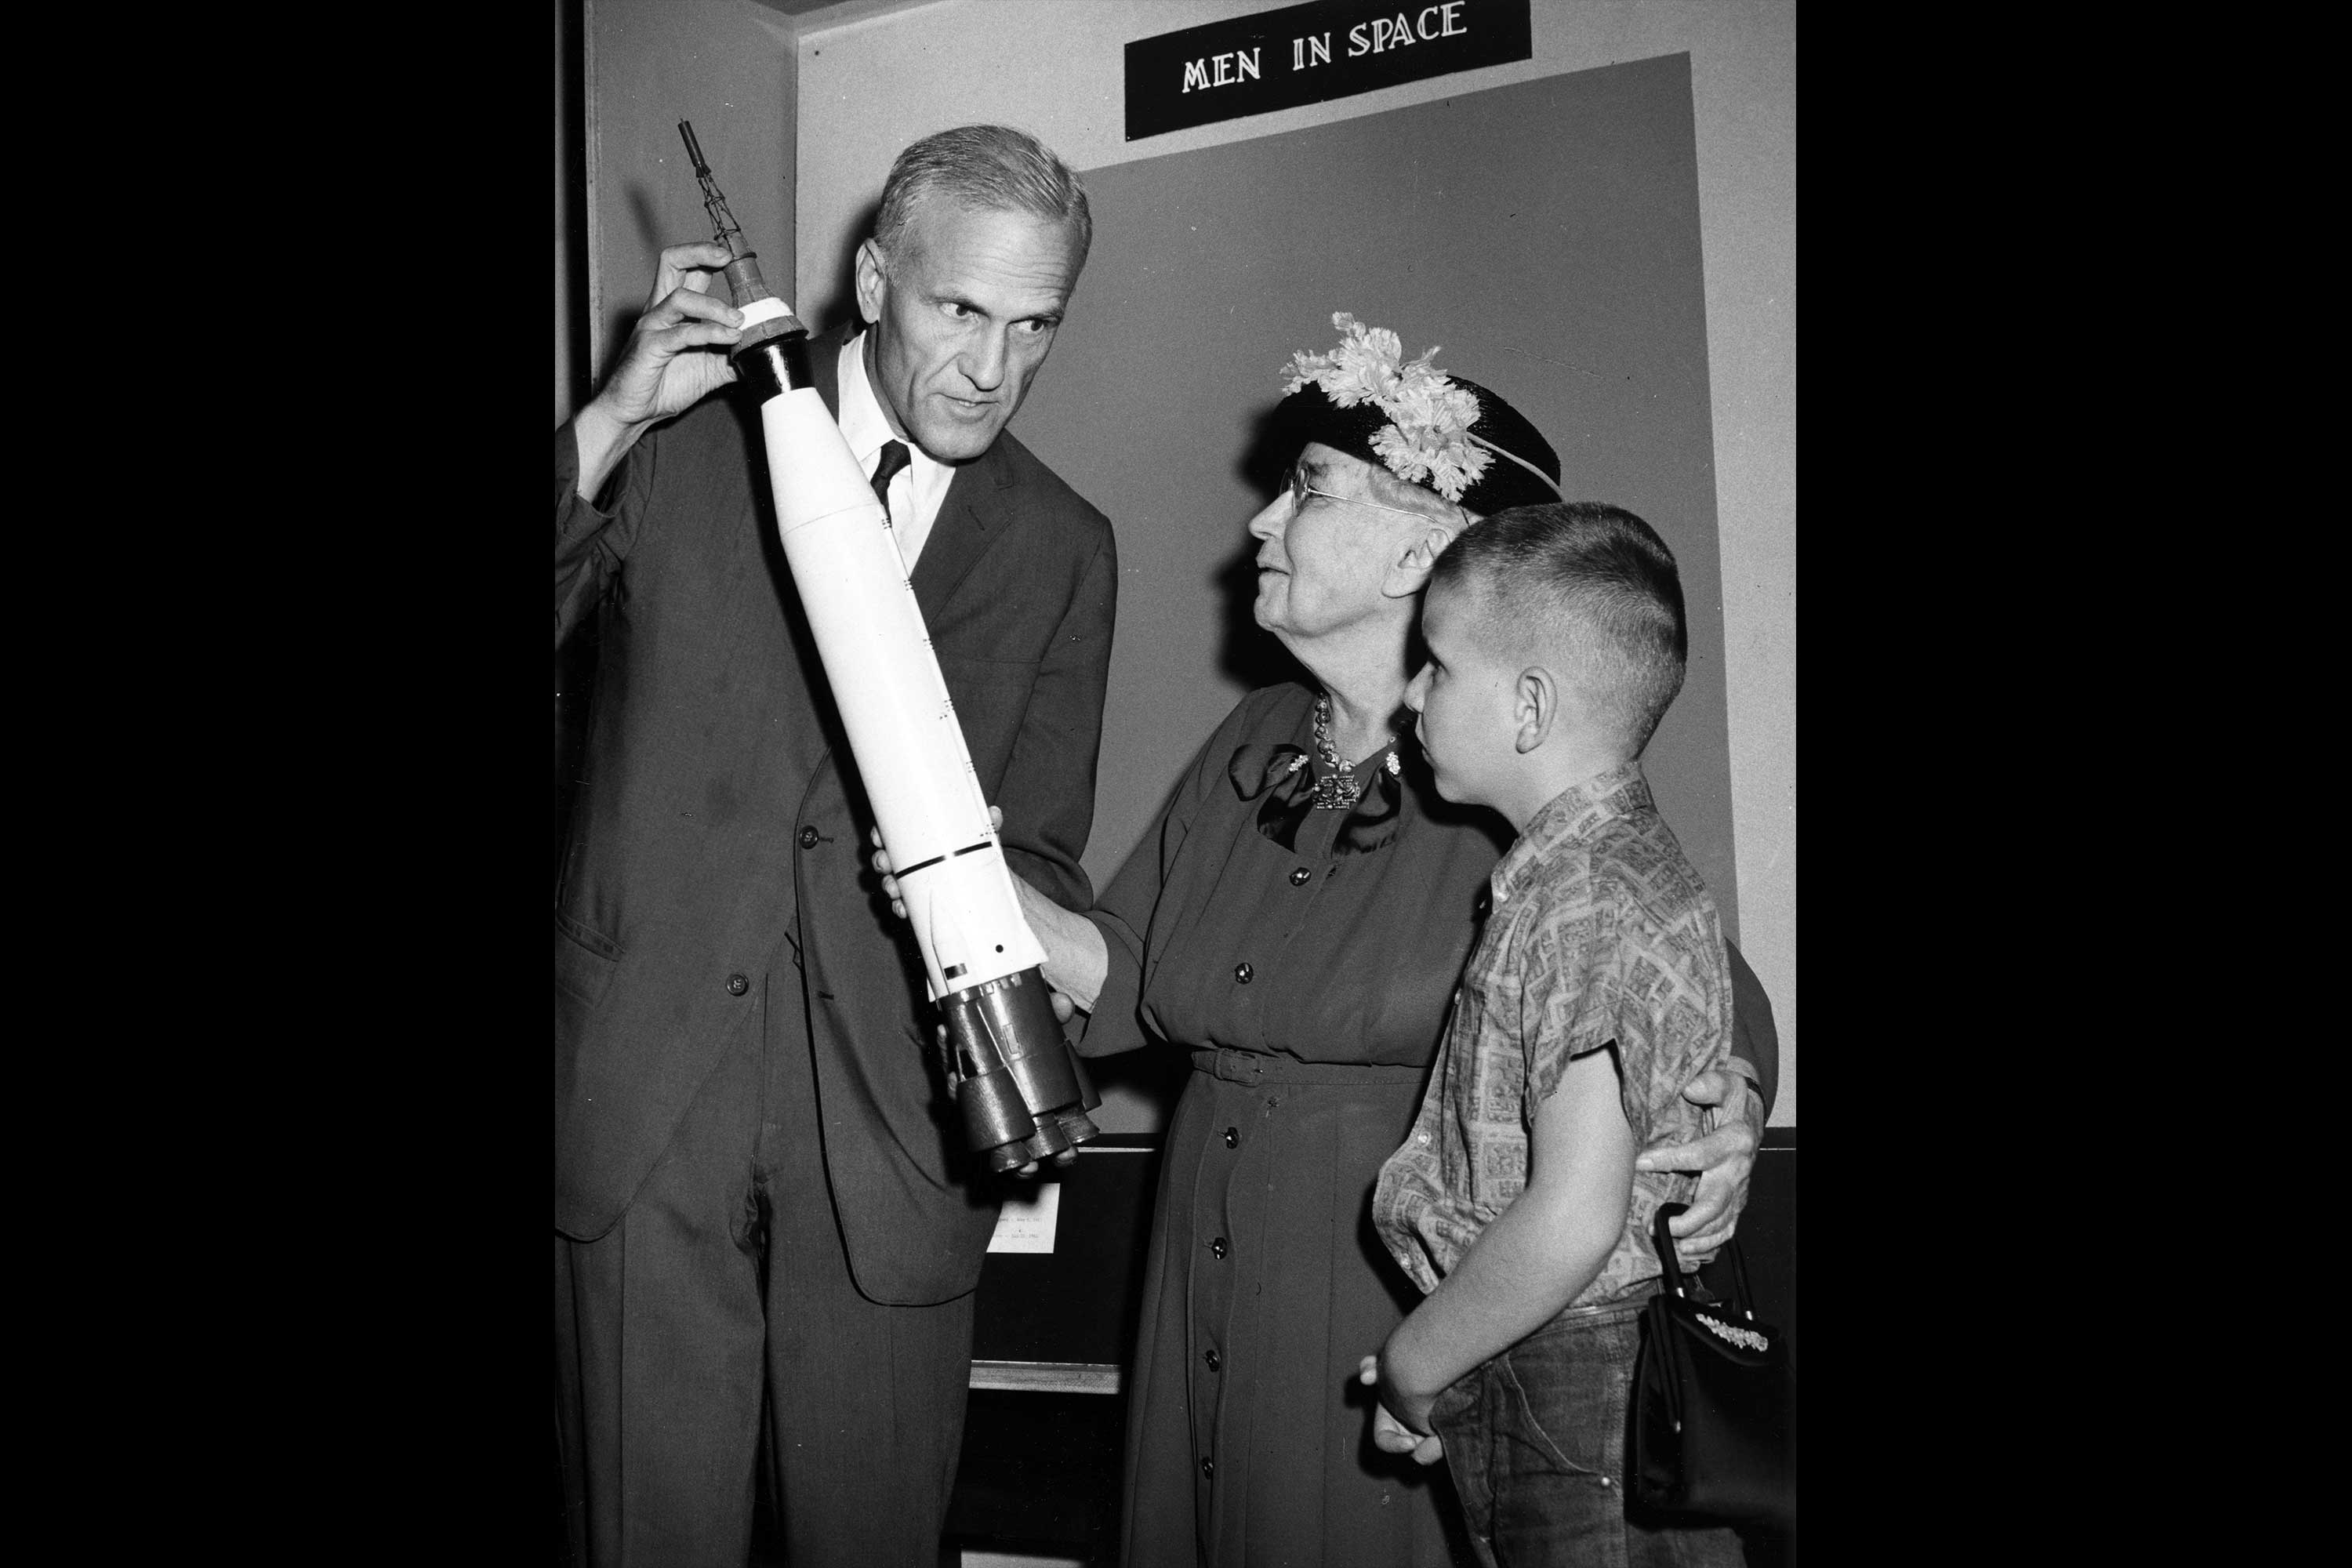 Brad Washburn with Atlas LV-3B. This is a photograph of three people looking at a model rocket.